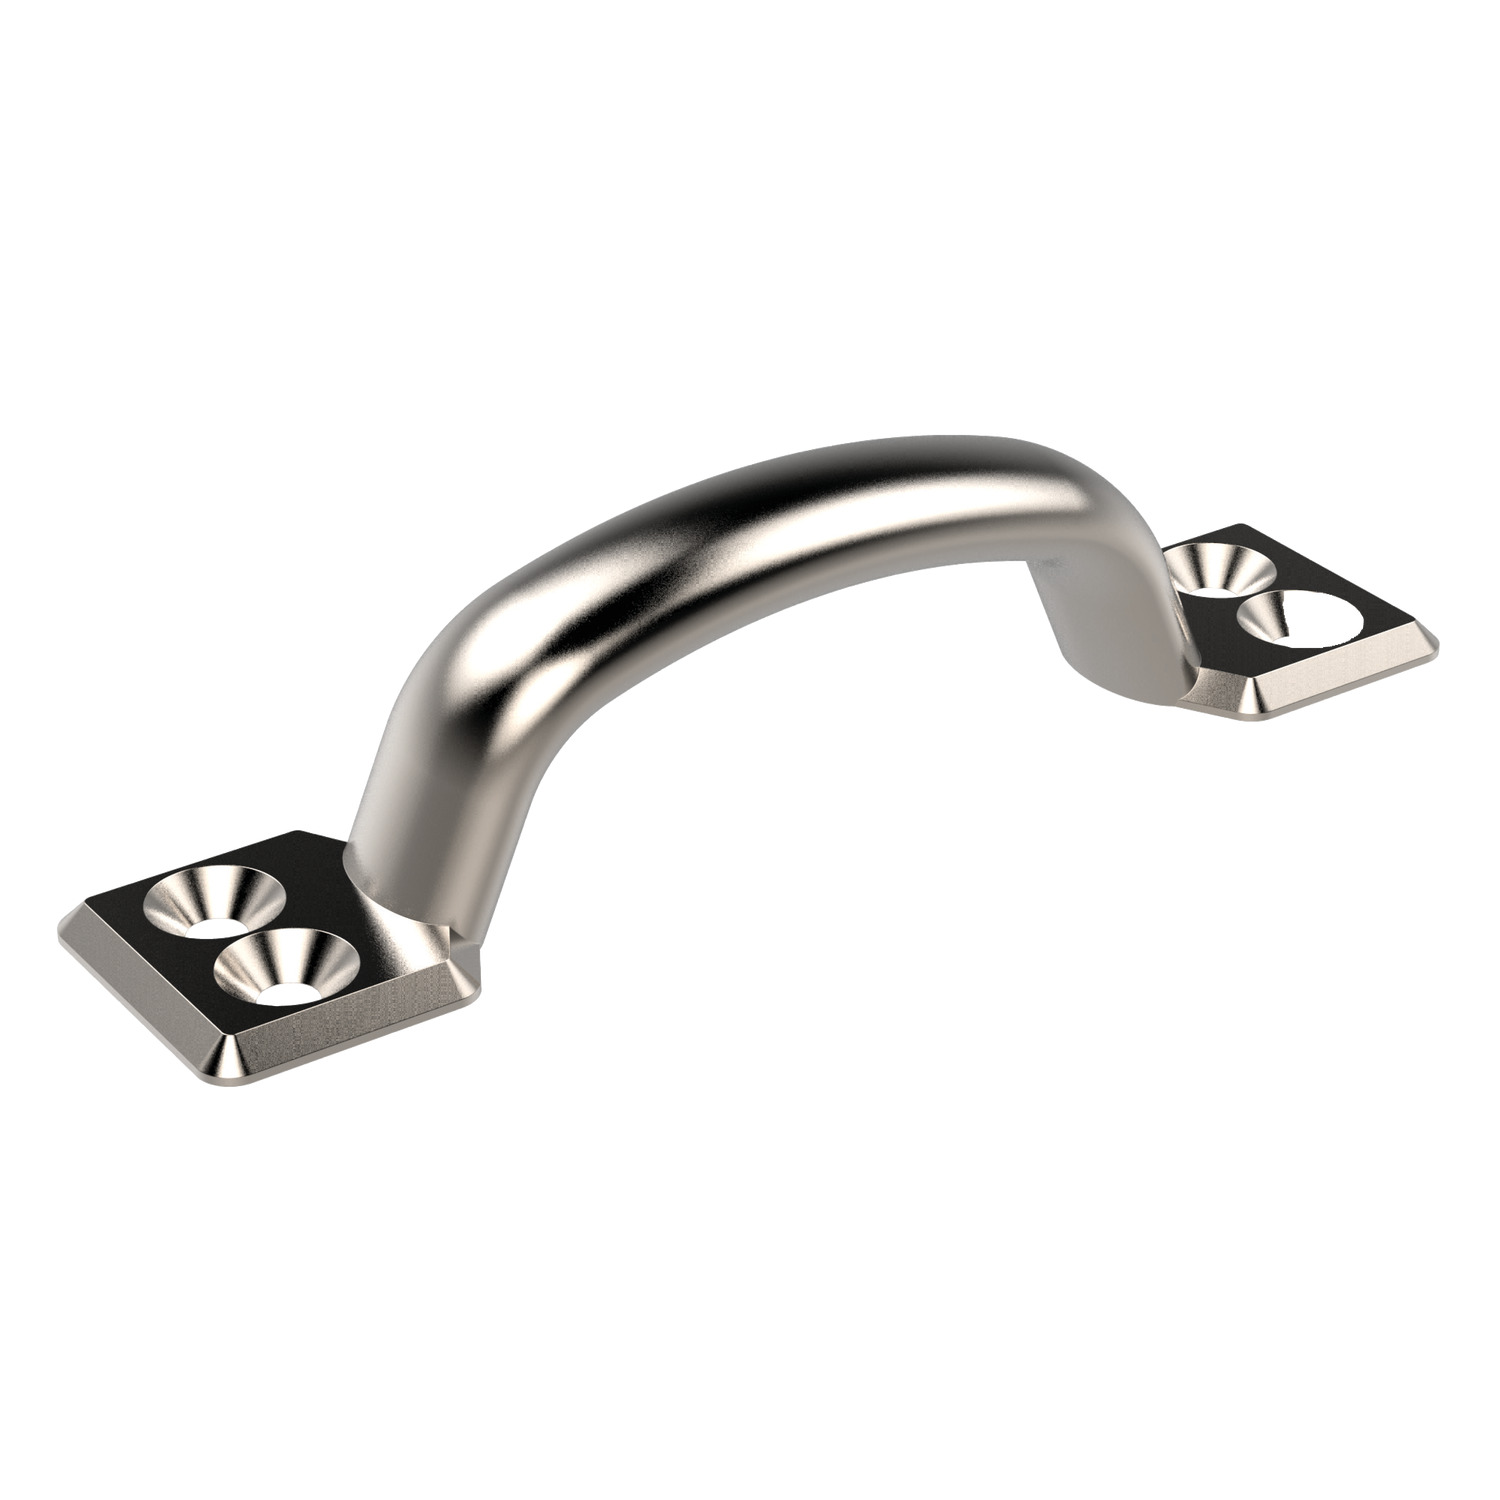 79583.W0001 Cold Forming Handles Nickel Plated Steel - 66 - 80 - 18,5